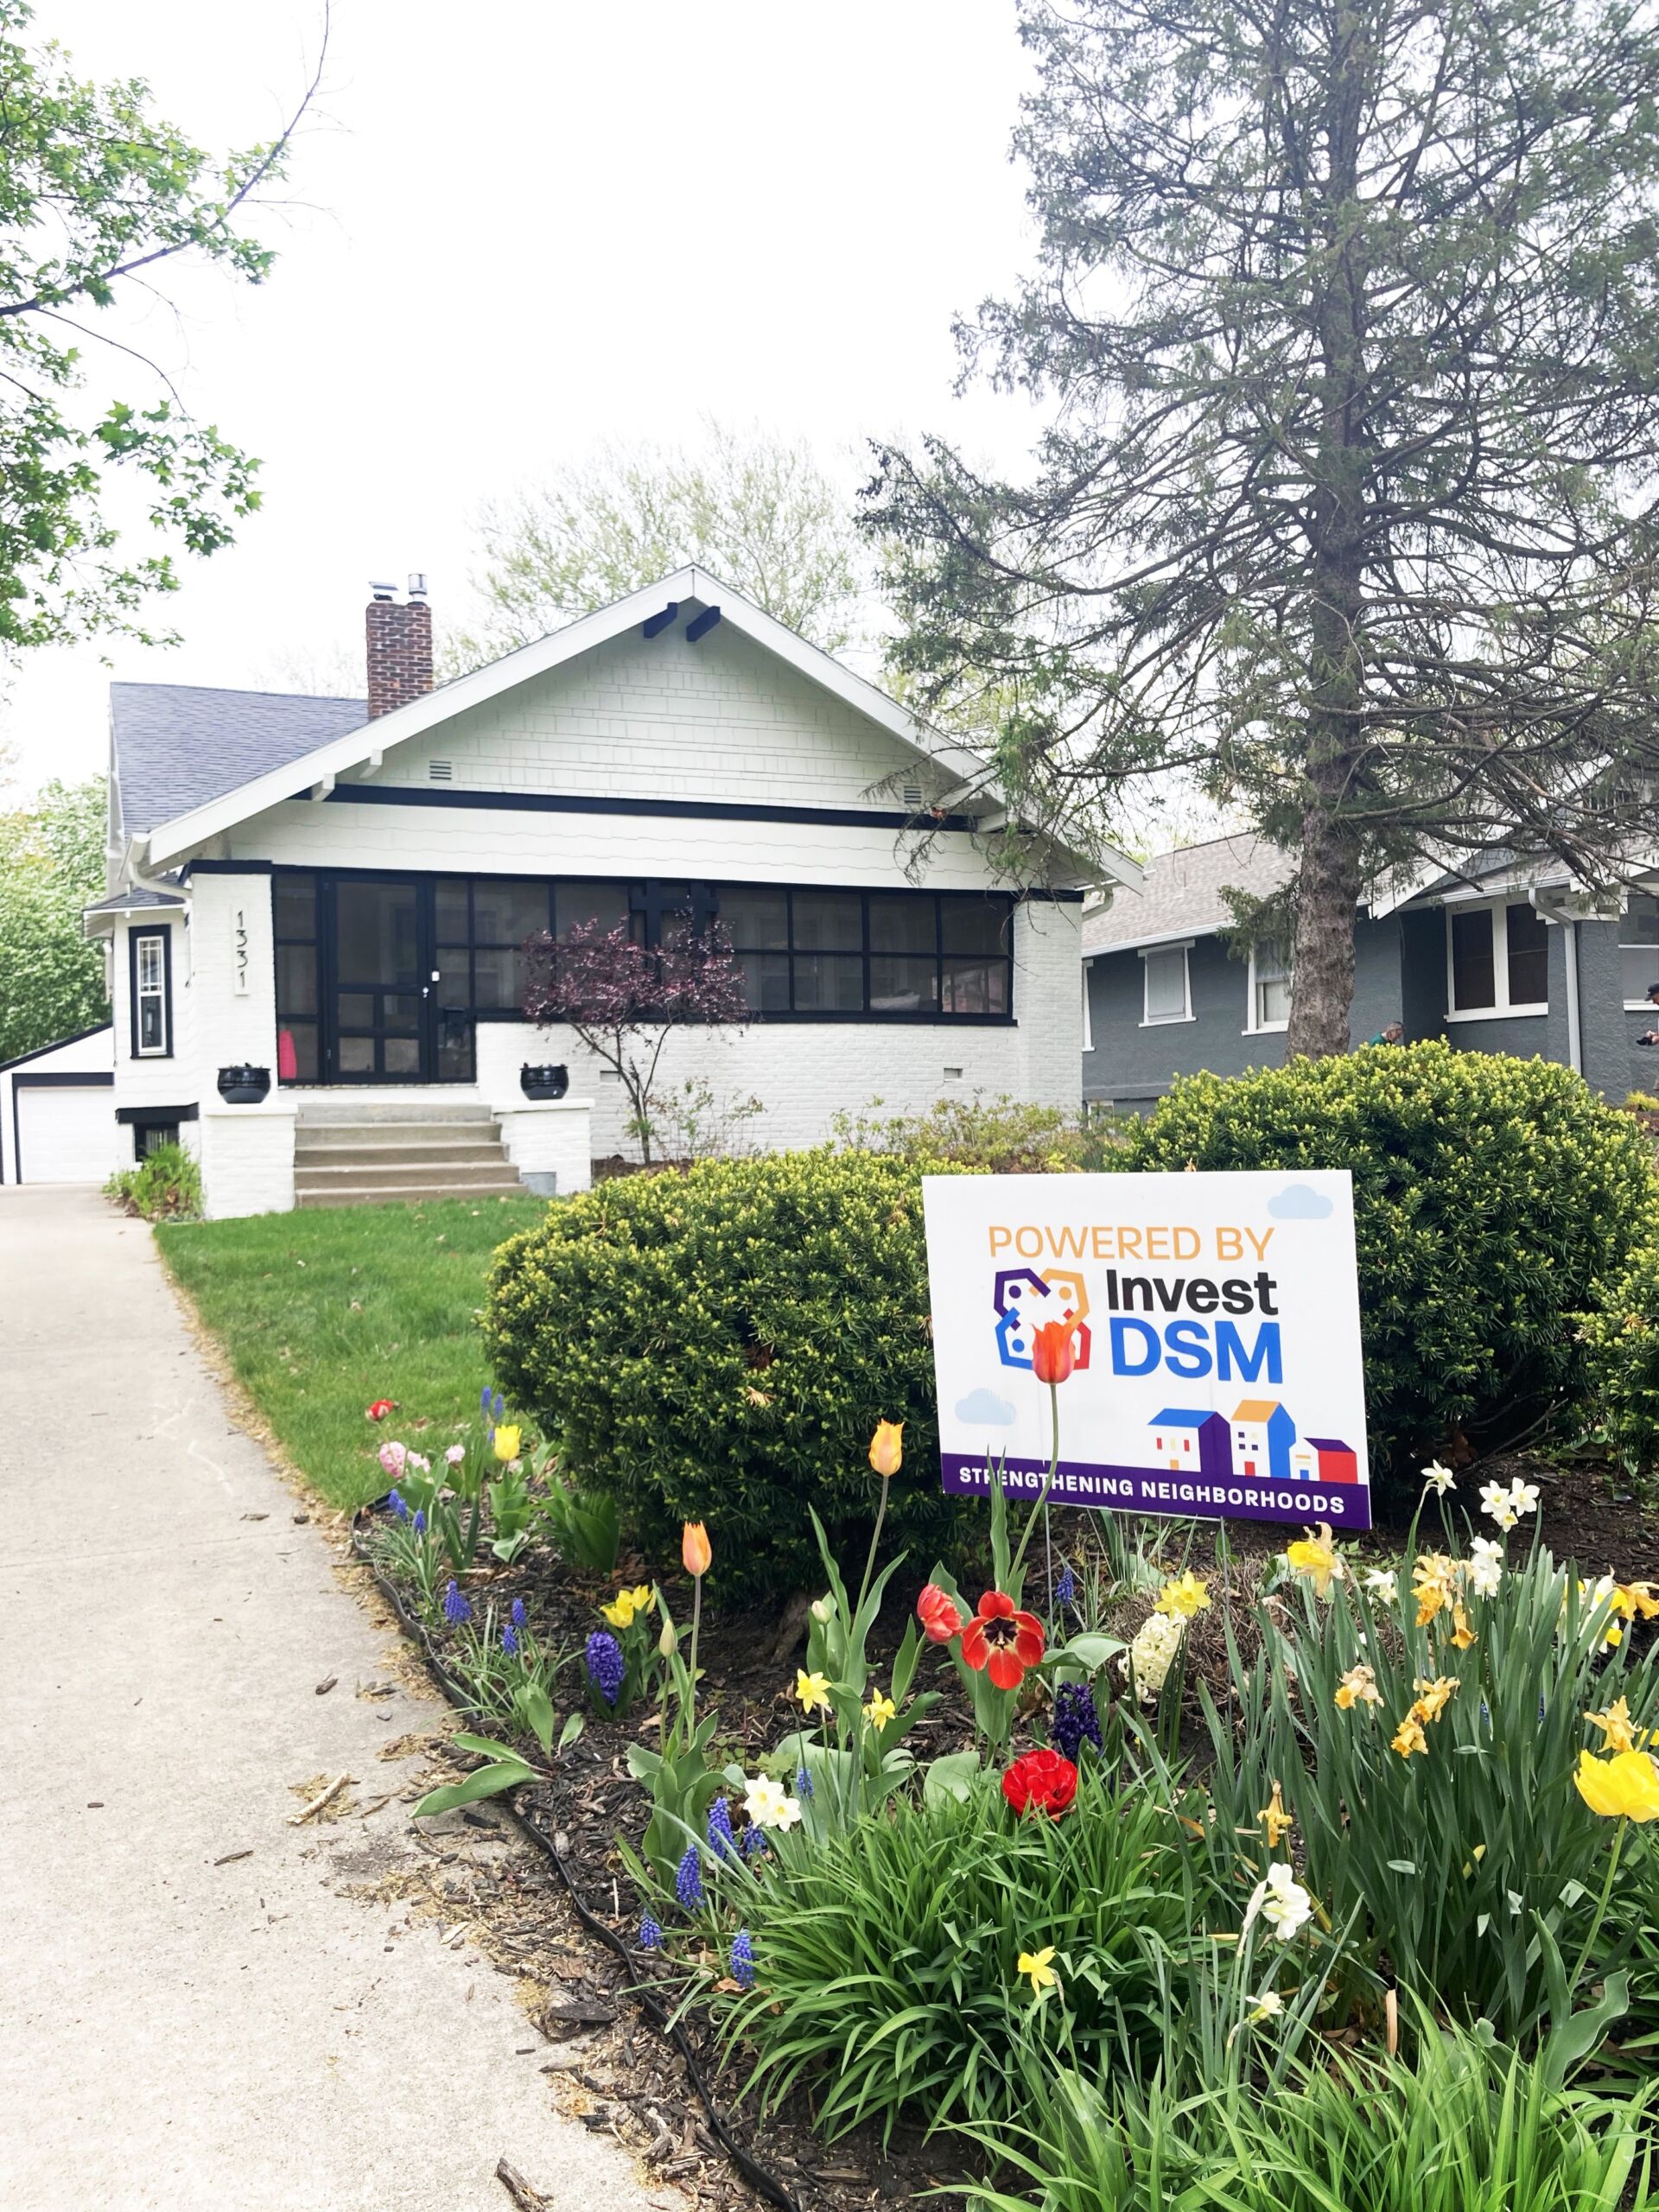 Invest DSM sign among flowers in front of updated home